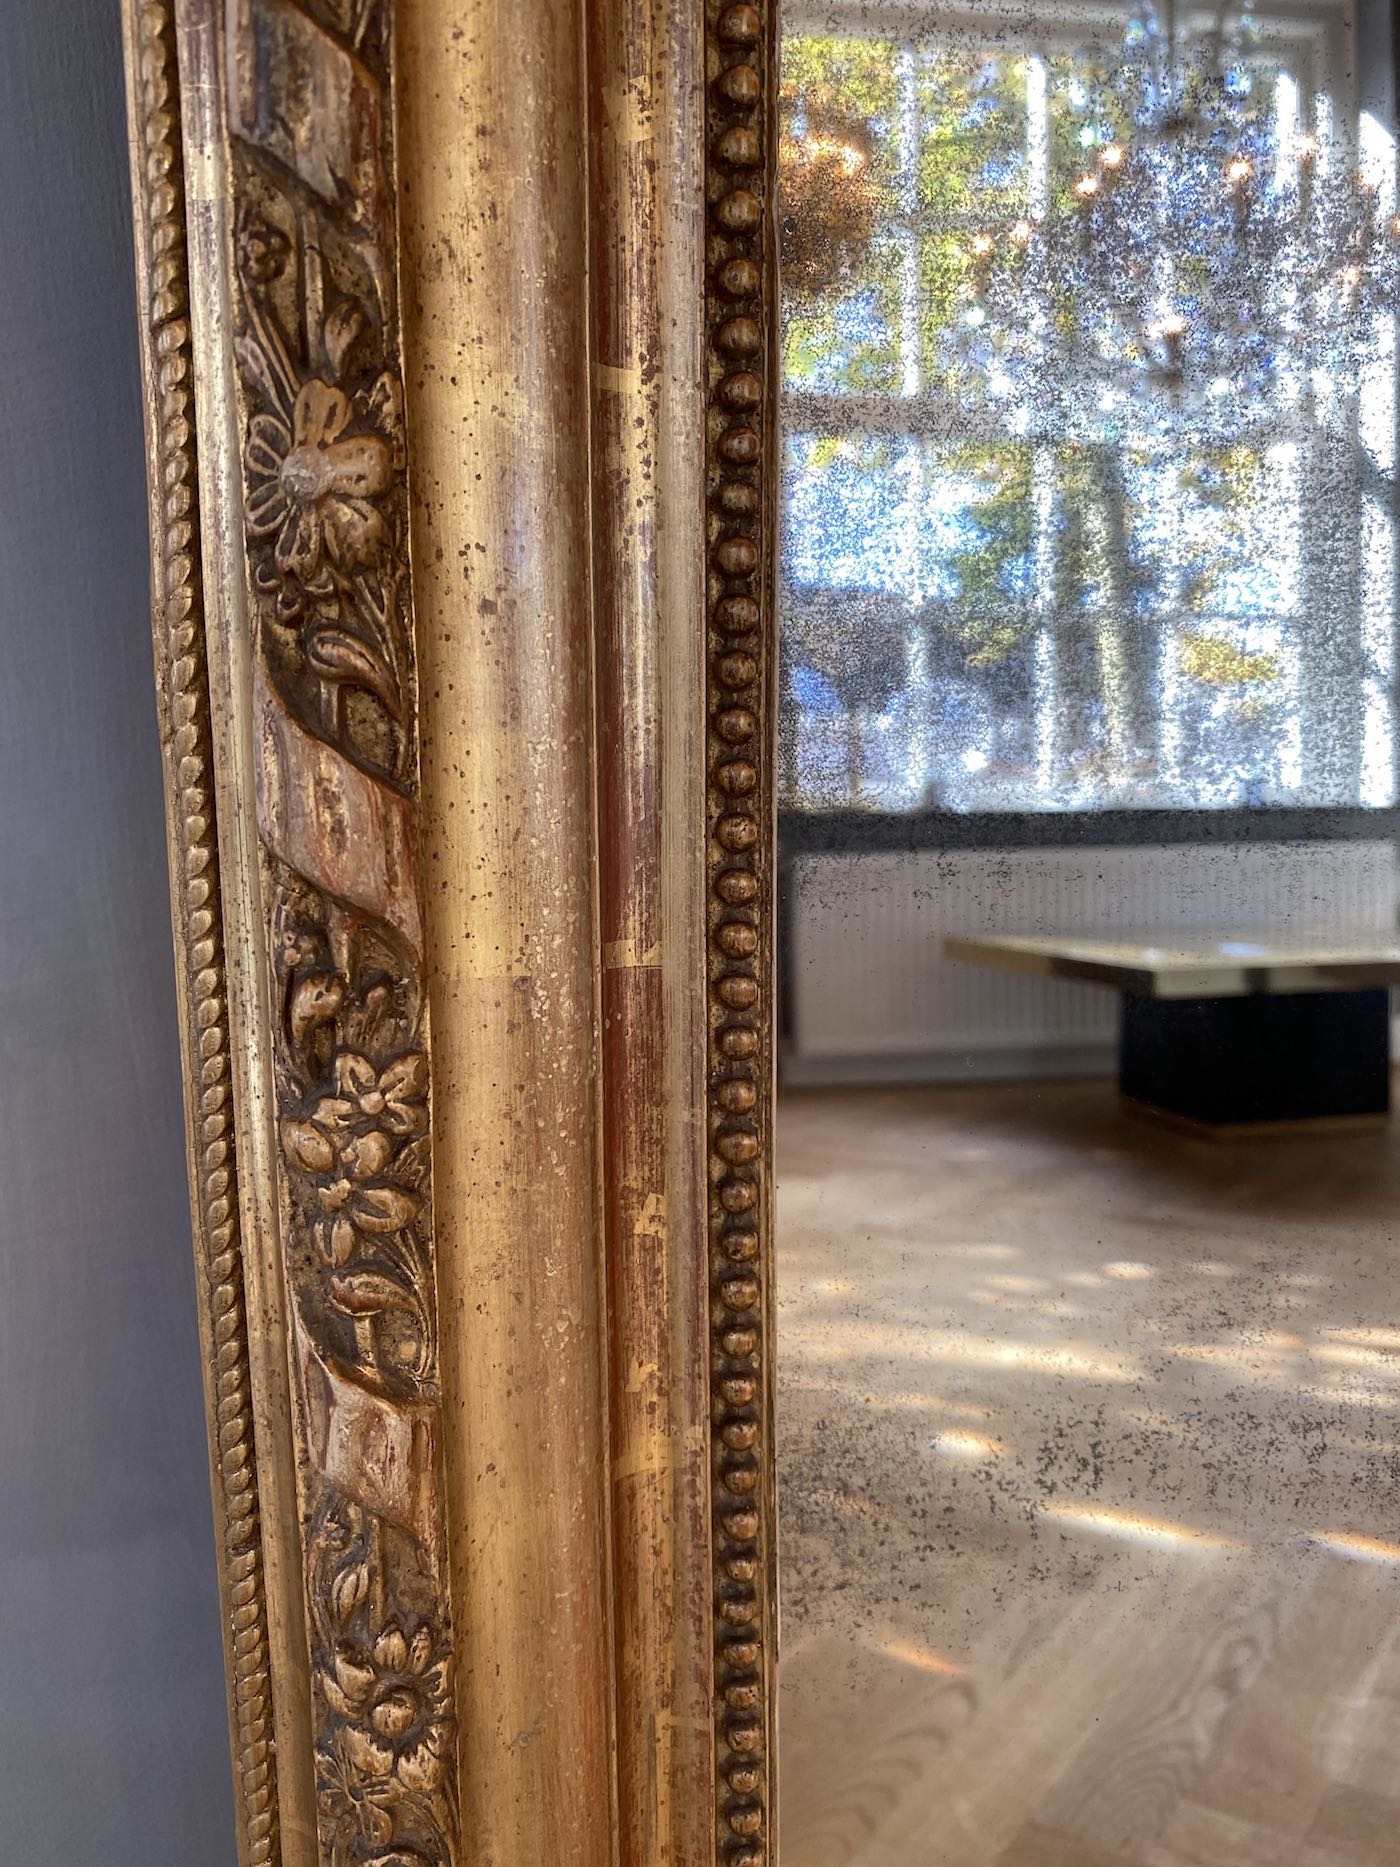 19th c. large impressive French mirror with a fabulous crown and putti